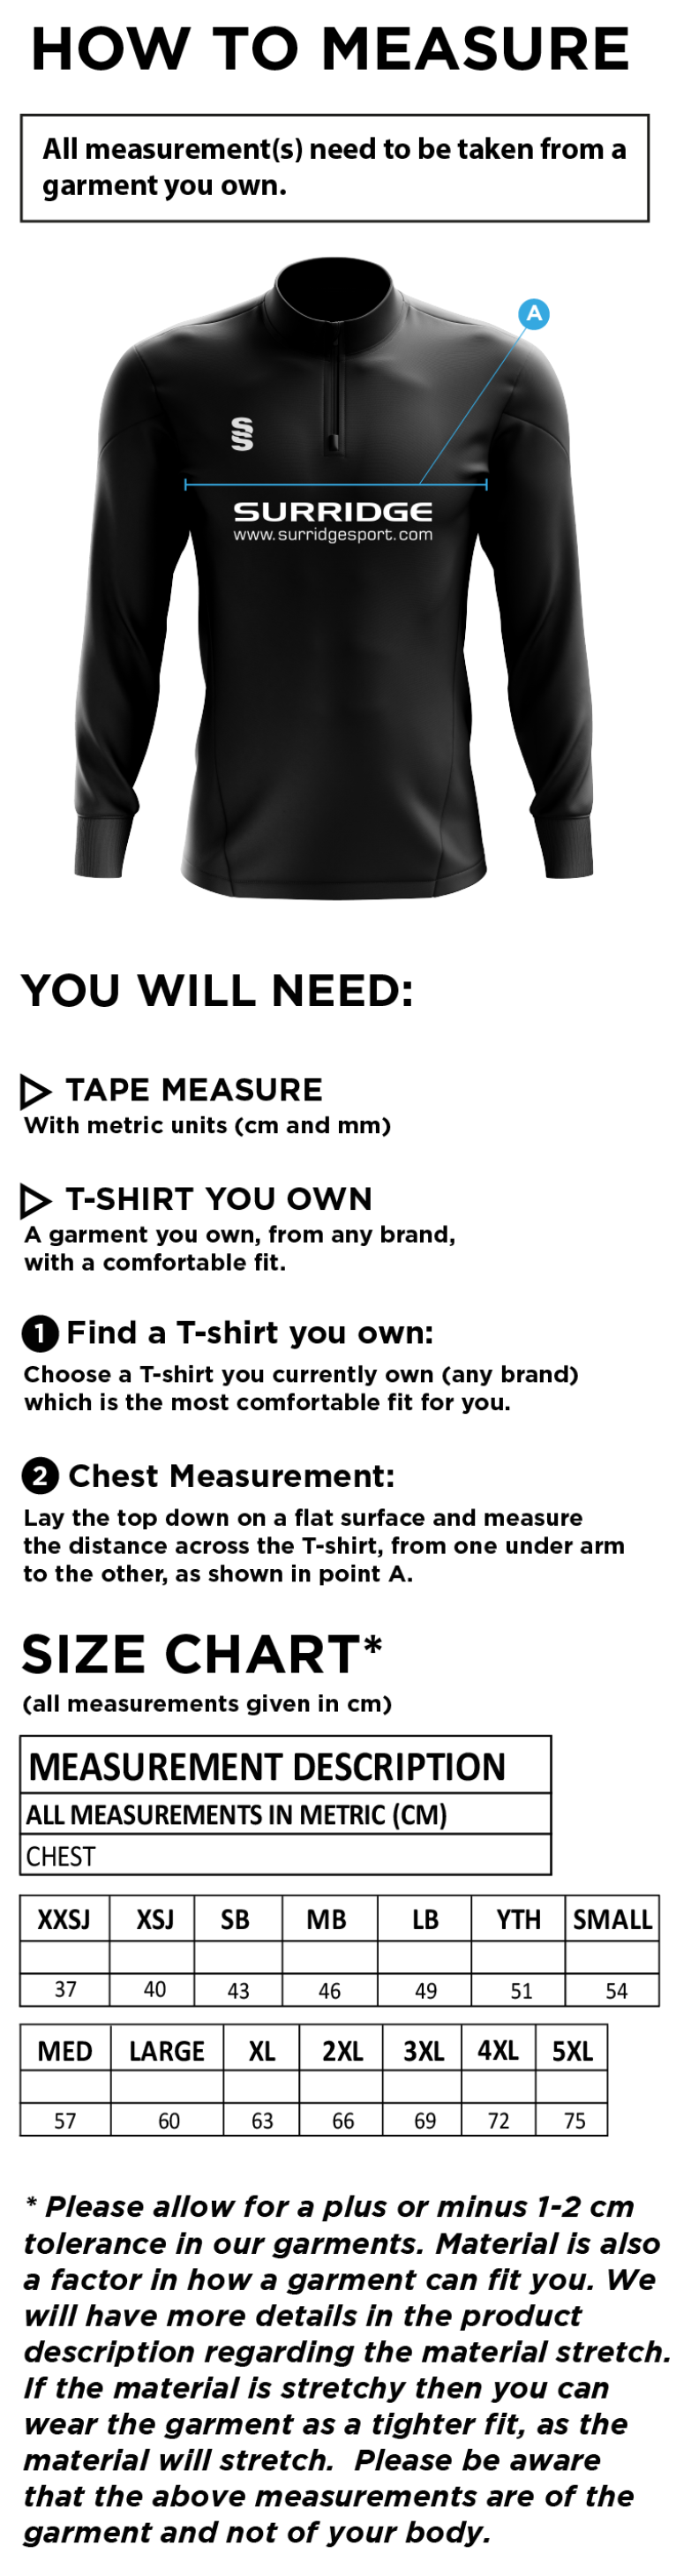 Youth's Fuse Performance Top : Black / White - Size Guide